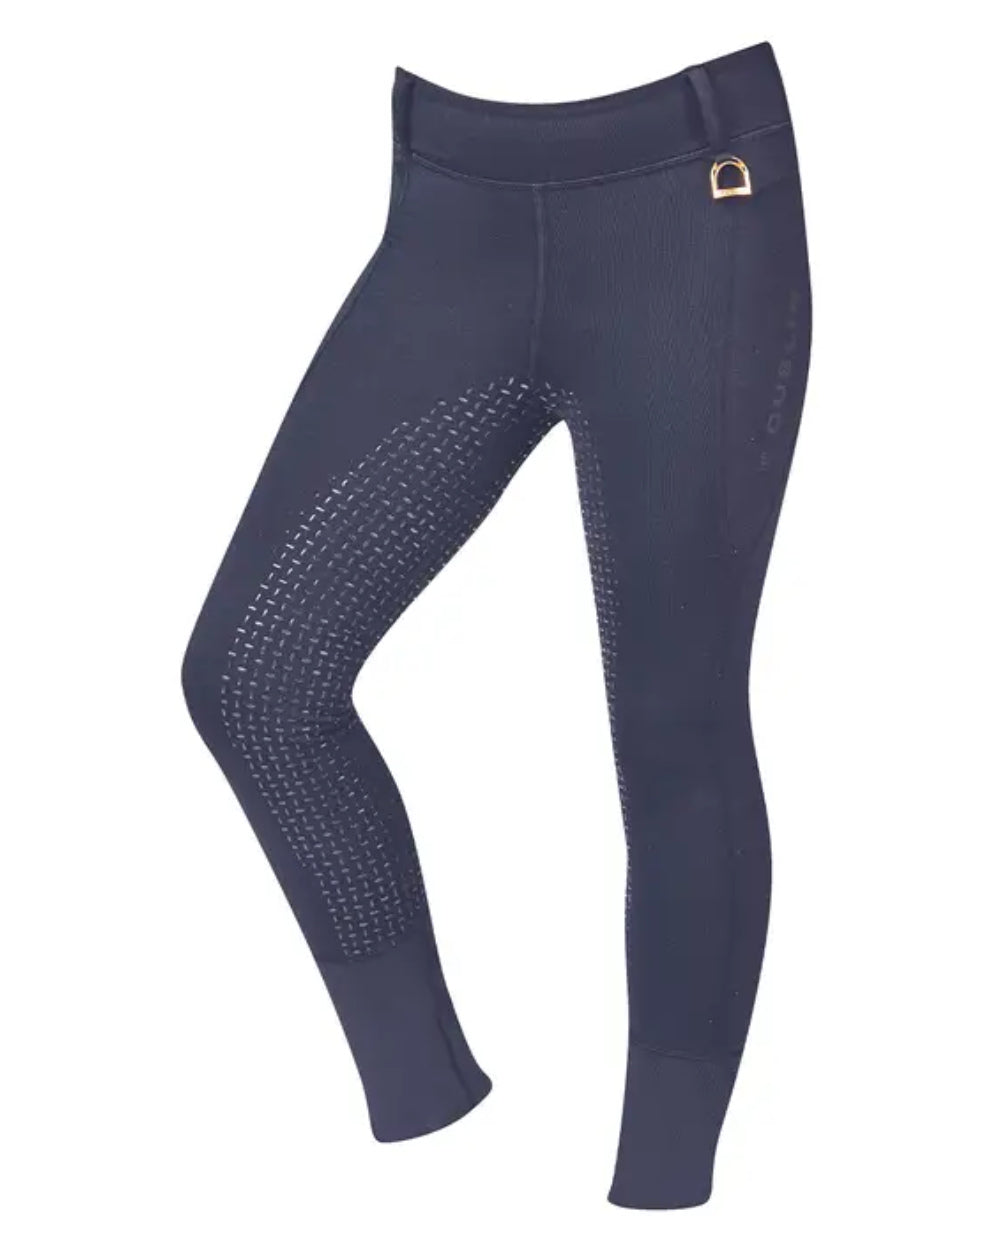 True Navy Coloured Dublin Childrens Cool It Everyday Riding Tights On A White Background 